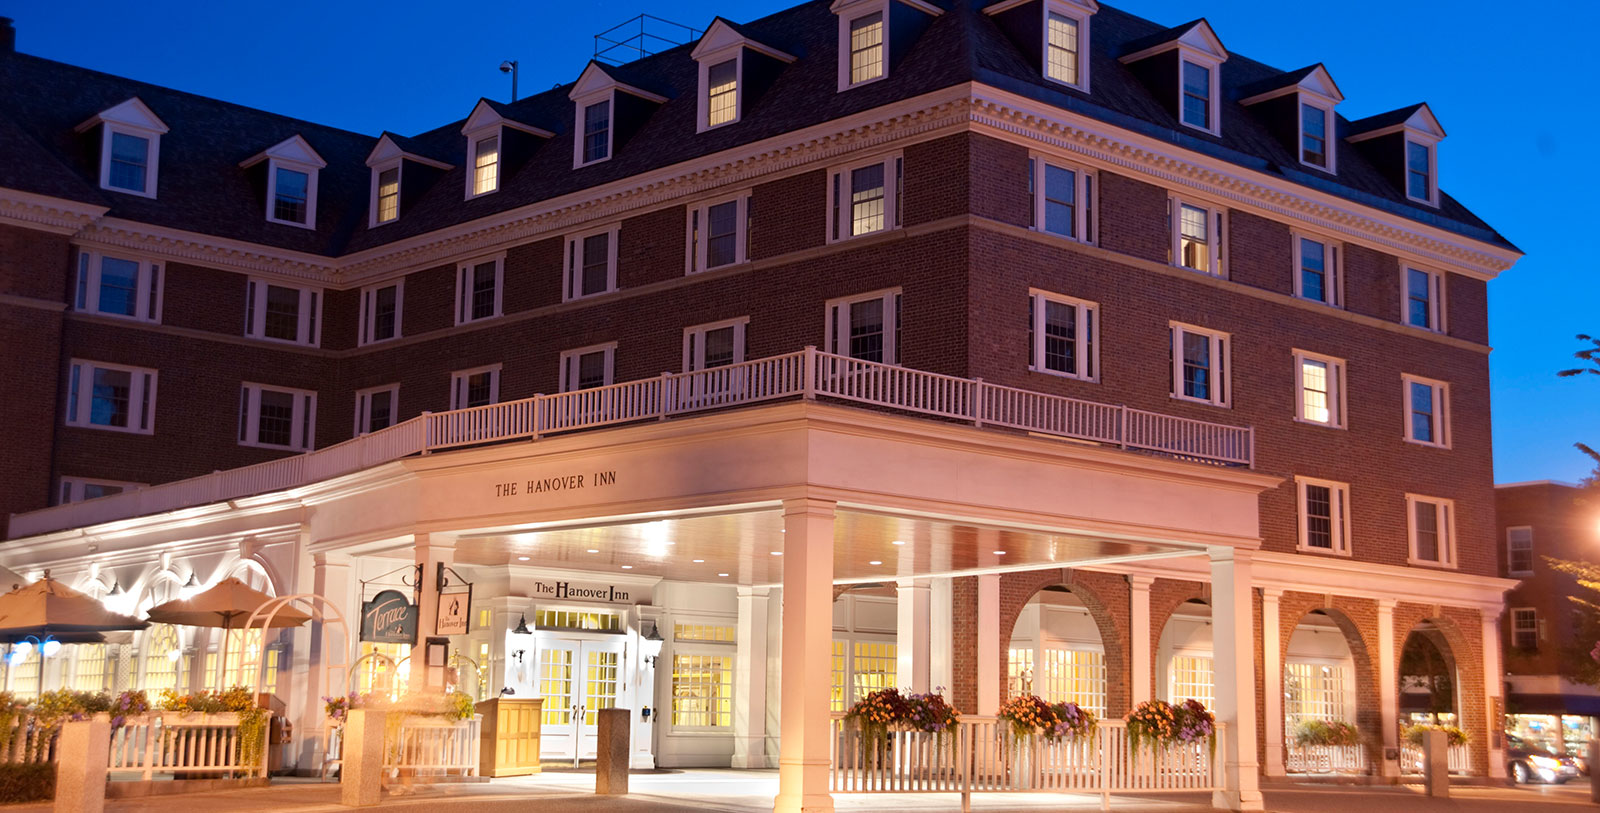 Image of hotel exterior Hanover Inn Dartmouth, 1780, Member of Historic Hotels of America, in Hanover, New Hampshire, Special Offers, Discounted Rates, Families, Romantic Escape, Honeymoons, Anniversaries, Reunions